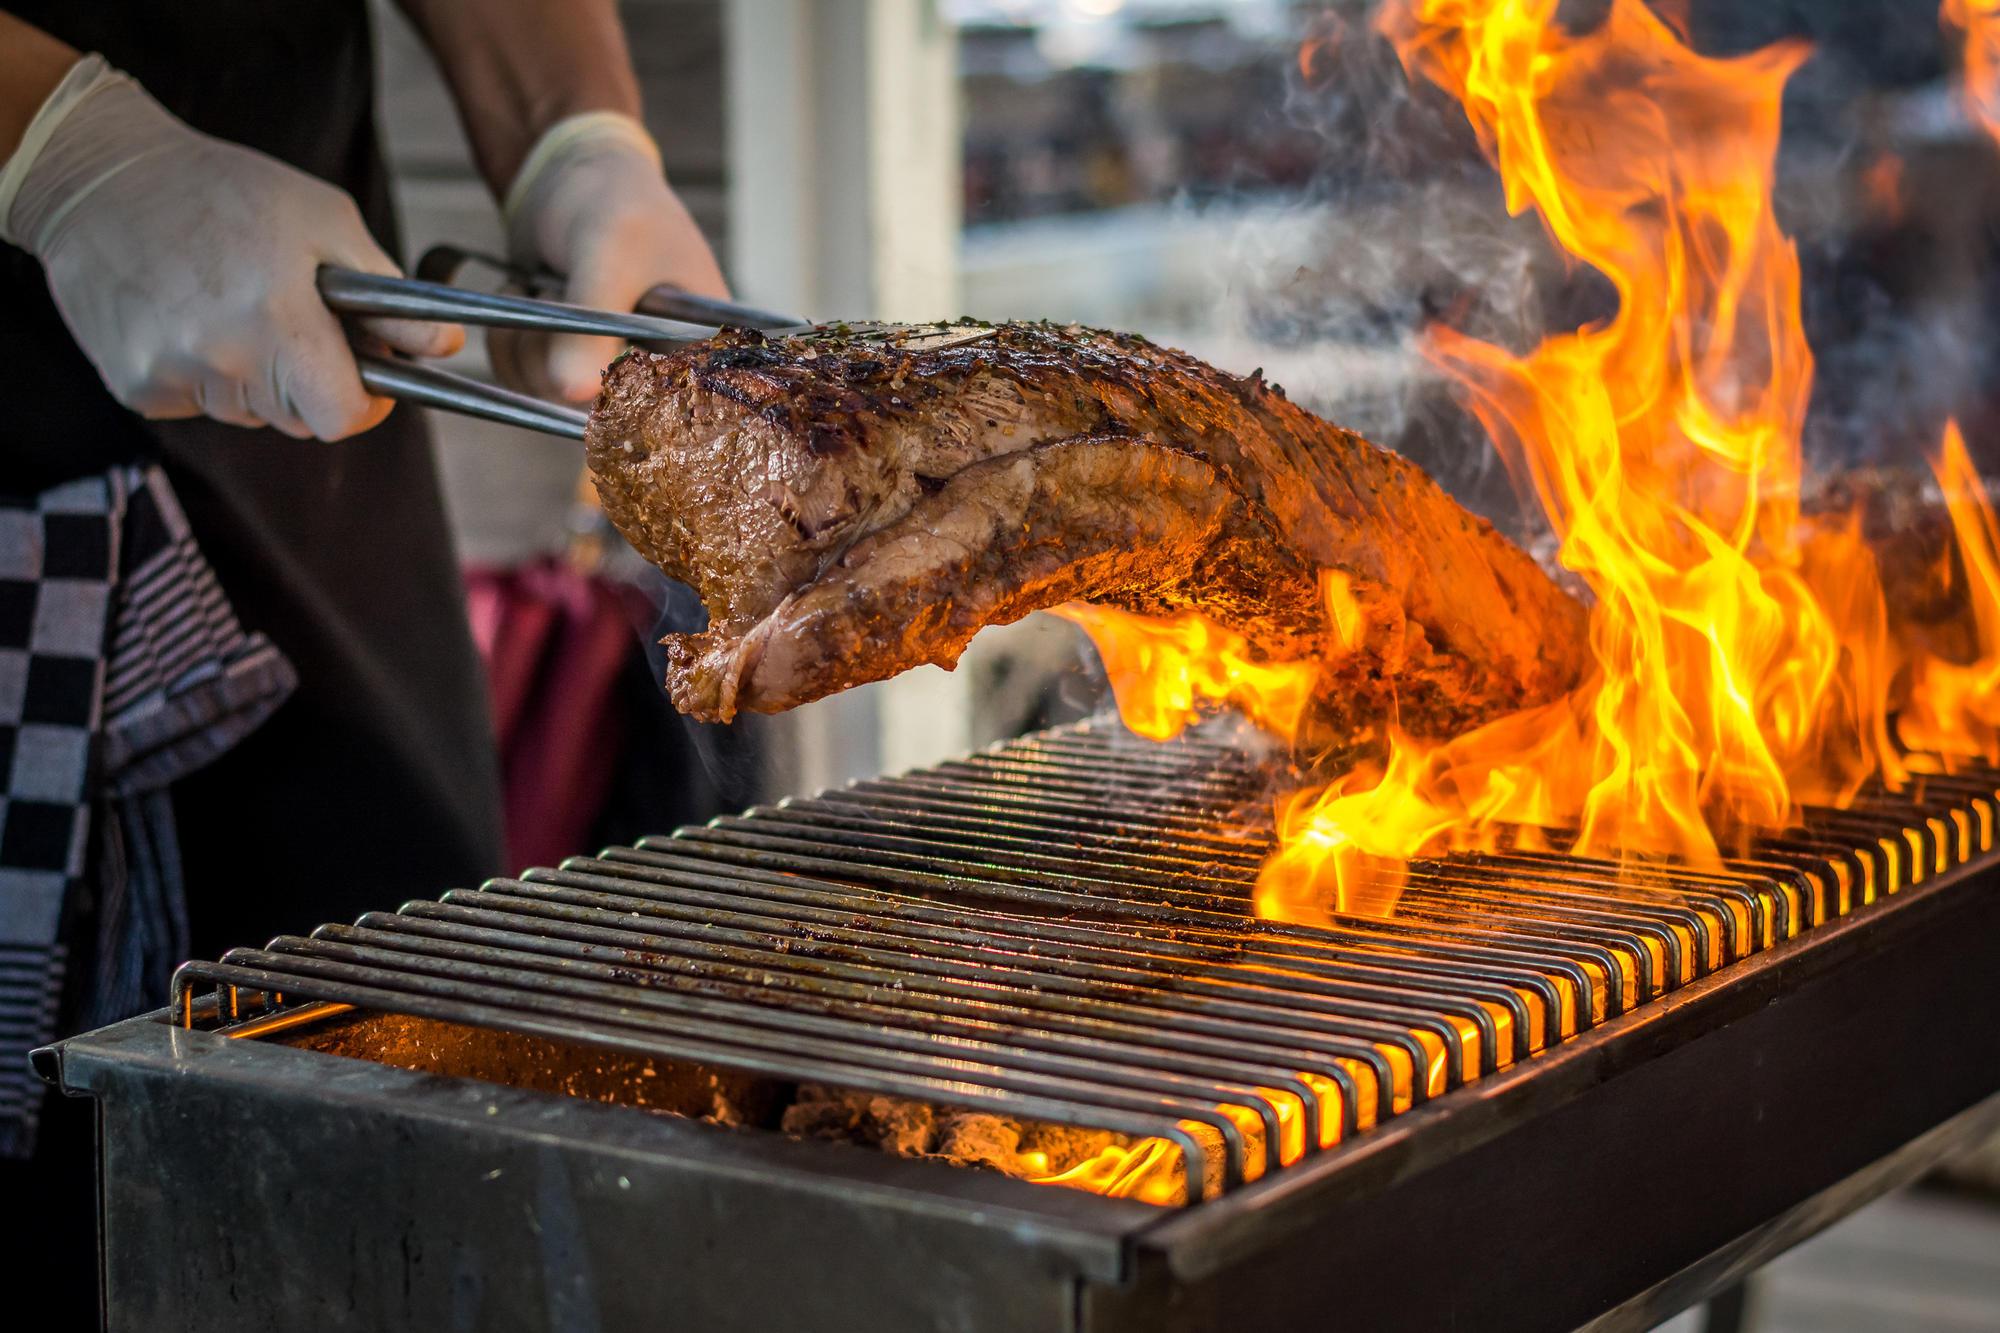 A person grills meat over an open flame.